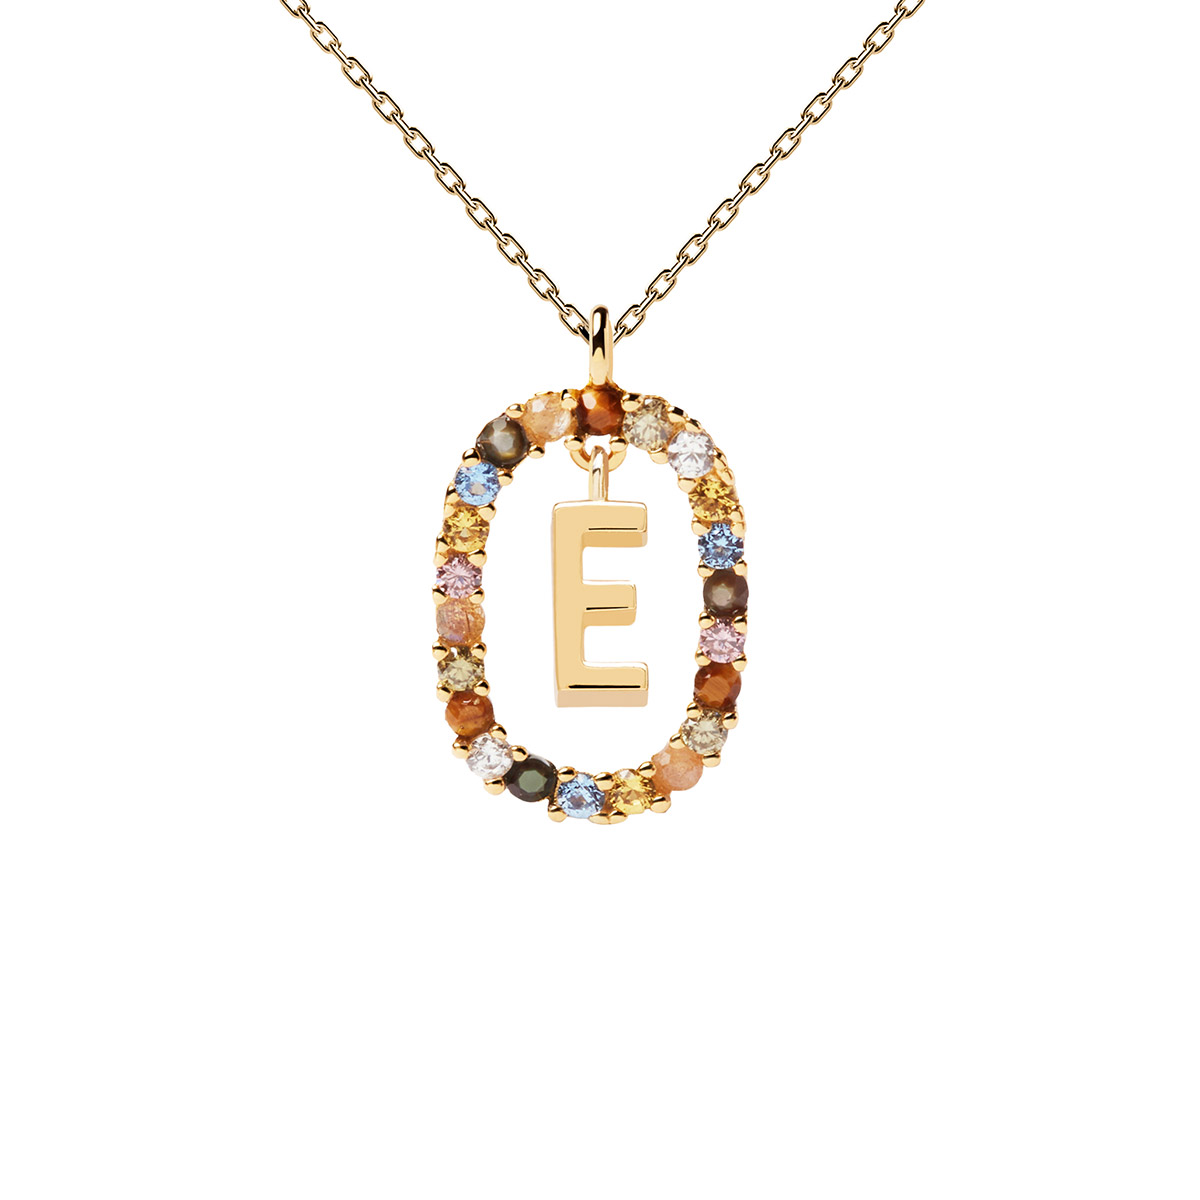 PD Paola Letter E Necklace - 18k Gold plating - GREEK ROOTS